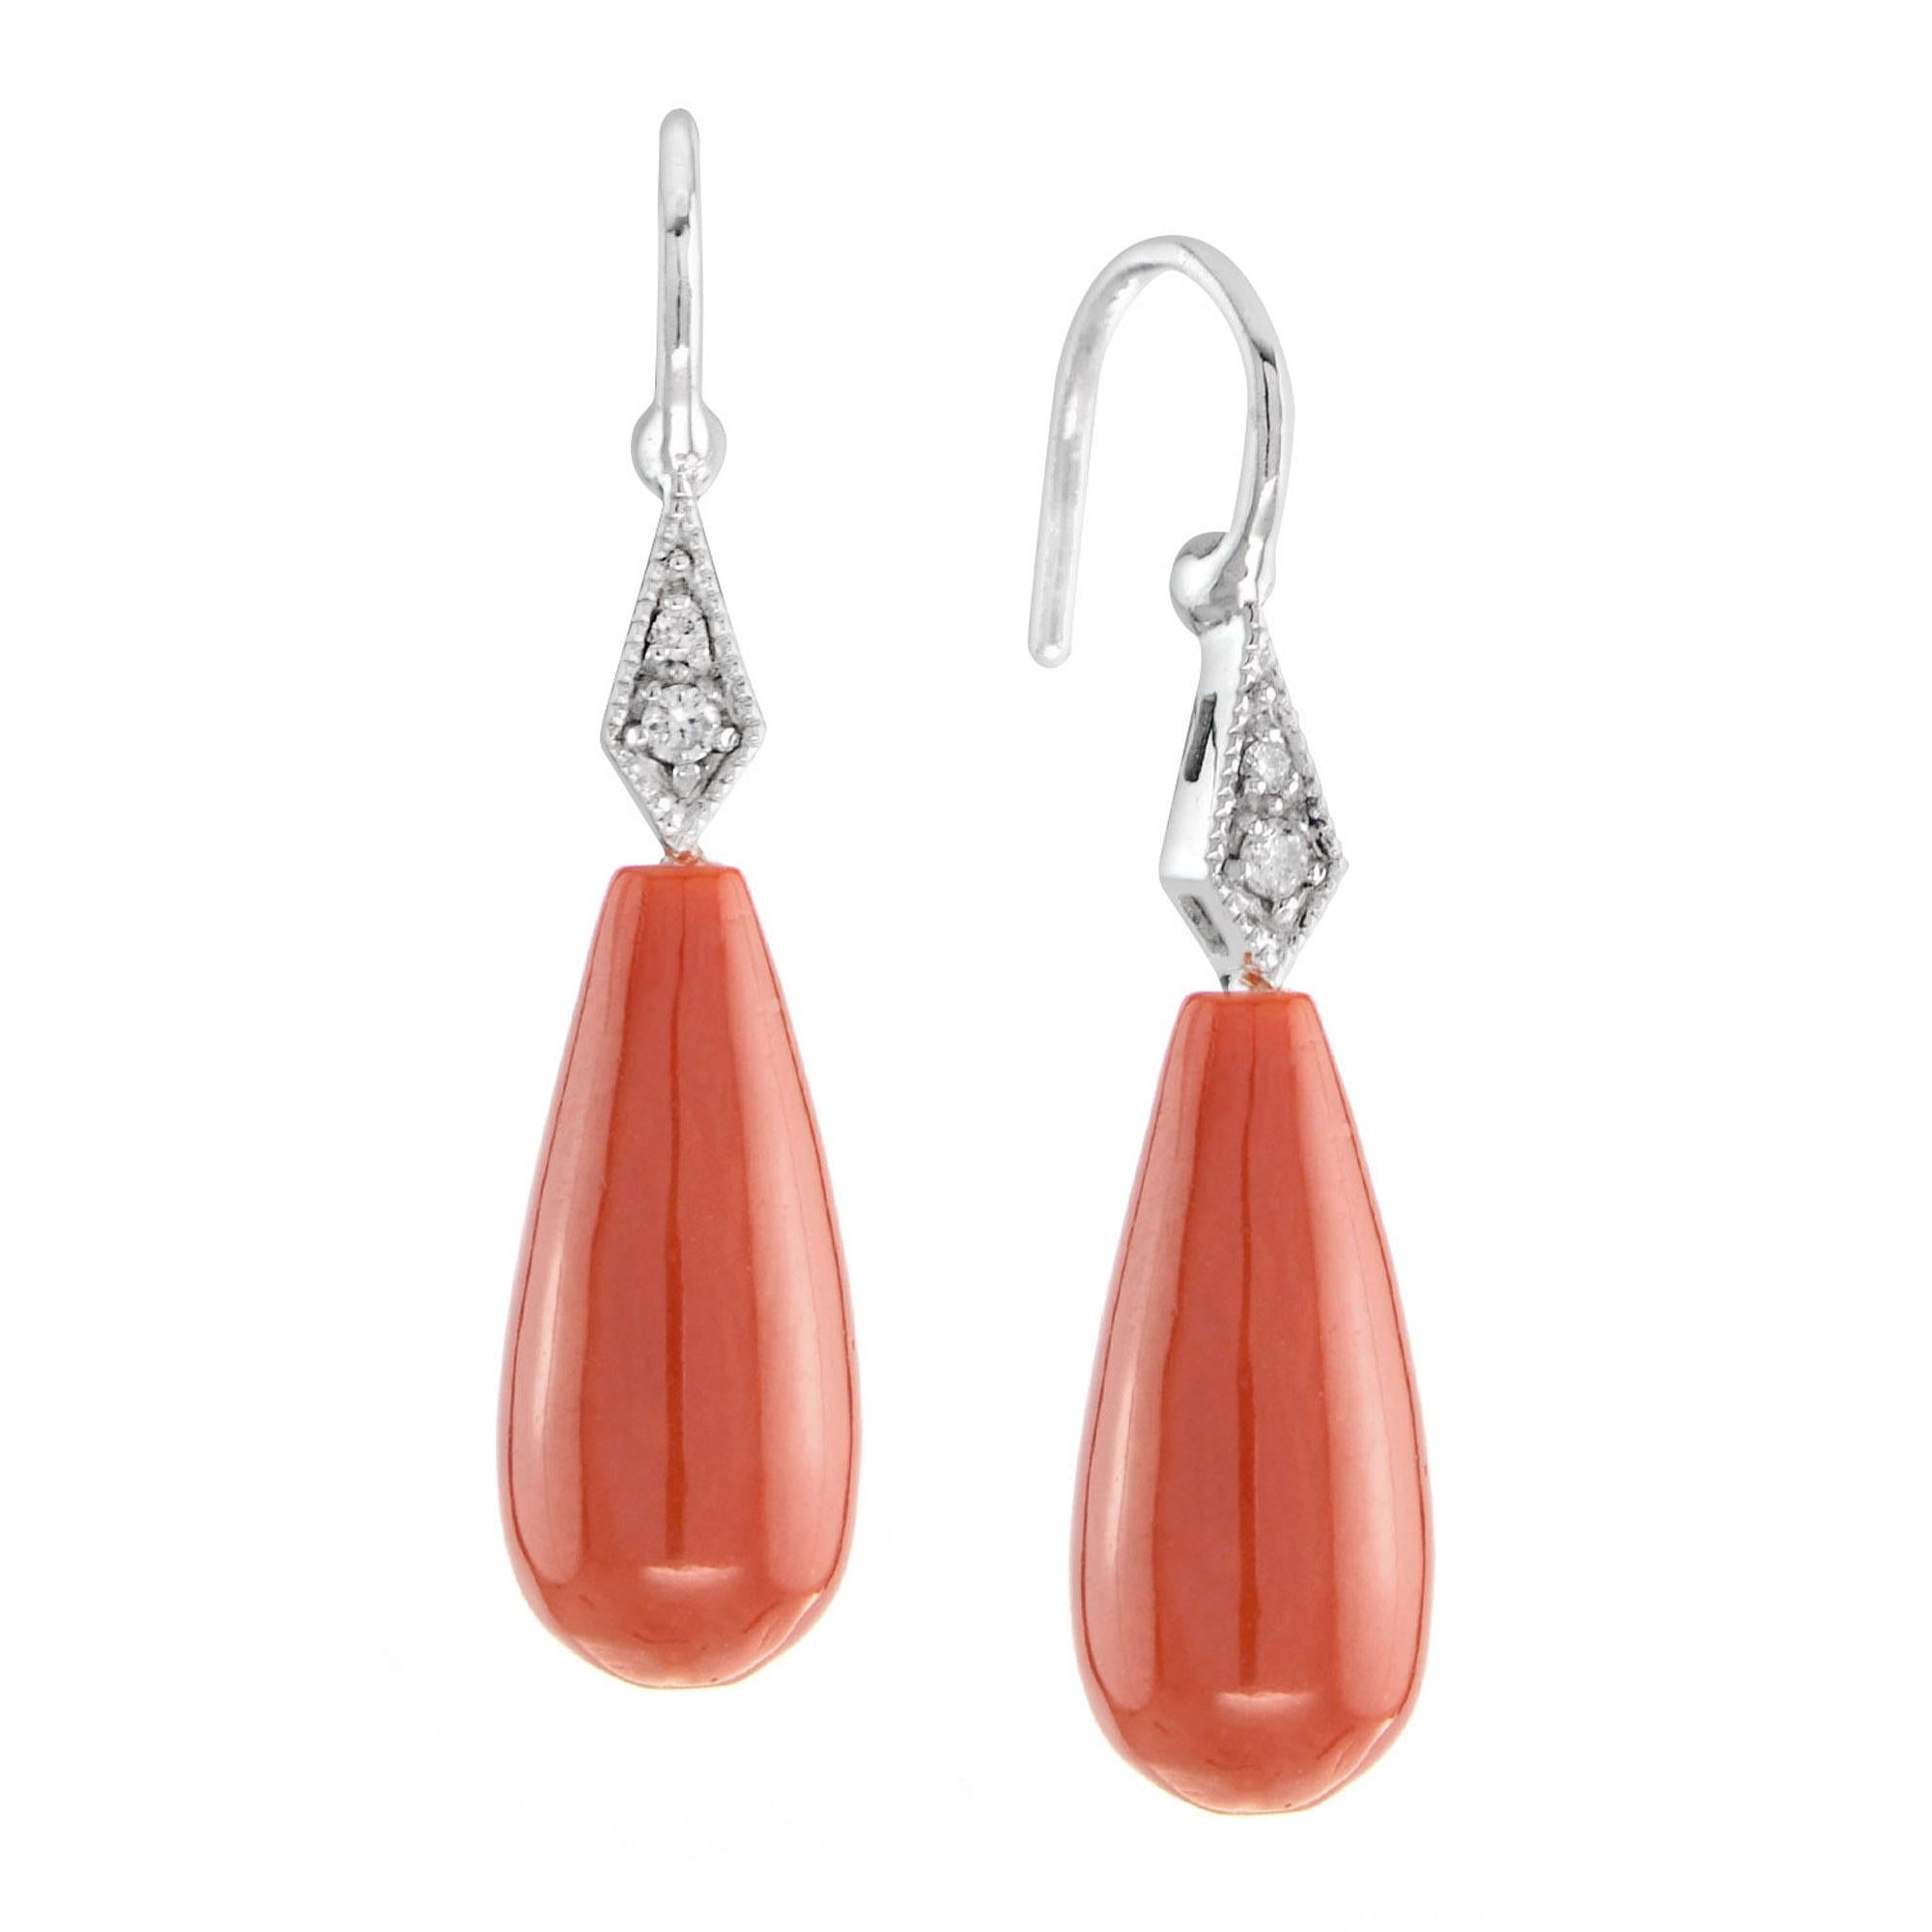 One Orange Coral and Diamond Drop Earrings in 18K White Gold